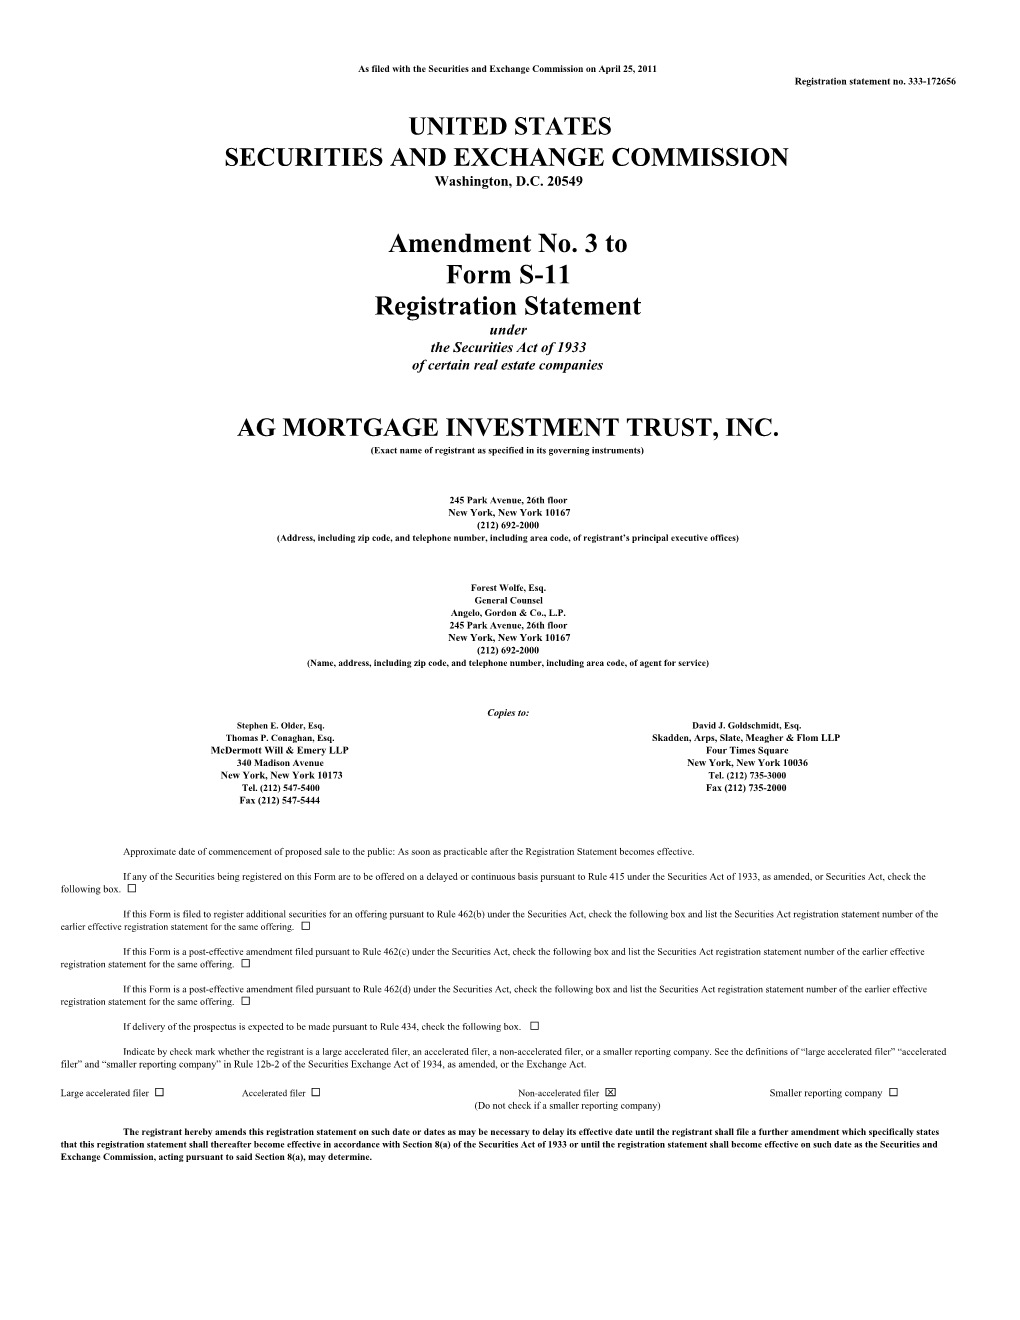 Amendment No. 3 to Form S-11 Registration Statement Under the Securities Act of 1933 of Certain Real Estate Companies